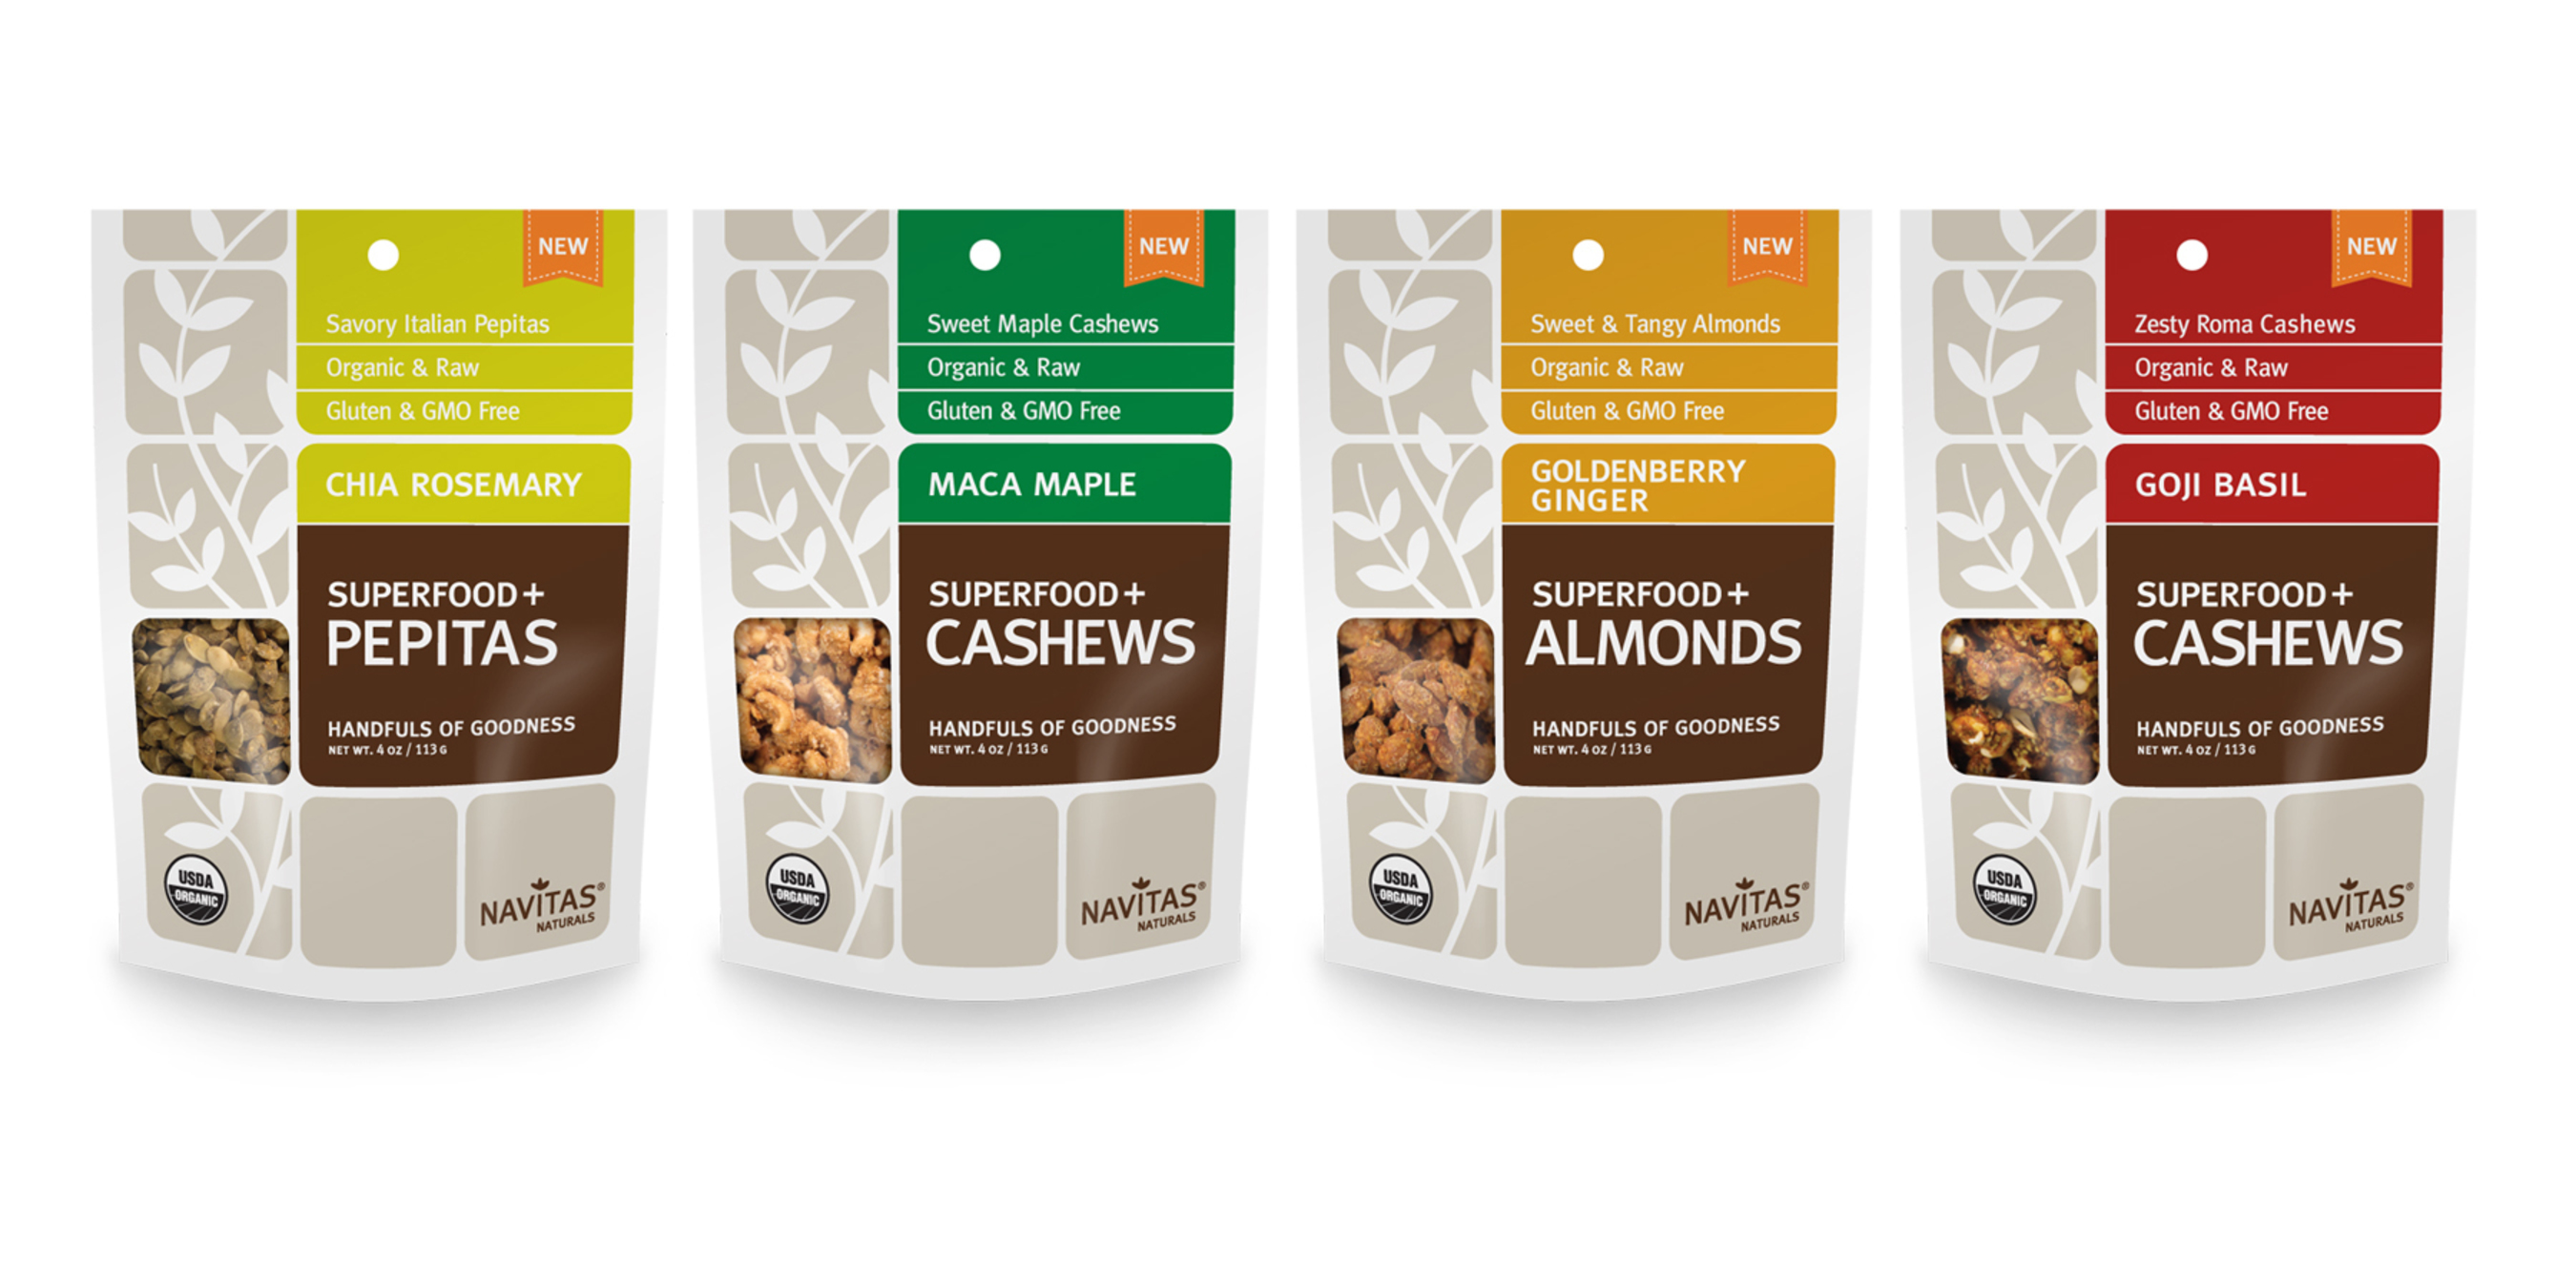 Superfood Seeds and Nuts are 4 varieties of nutrient-dense snacks from Navitas Naturals that are ideal for on-the-go lifestyles. (PRNewsFoto/Navitas Naturals)